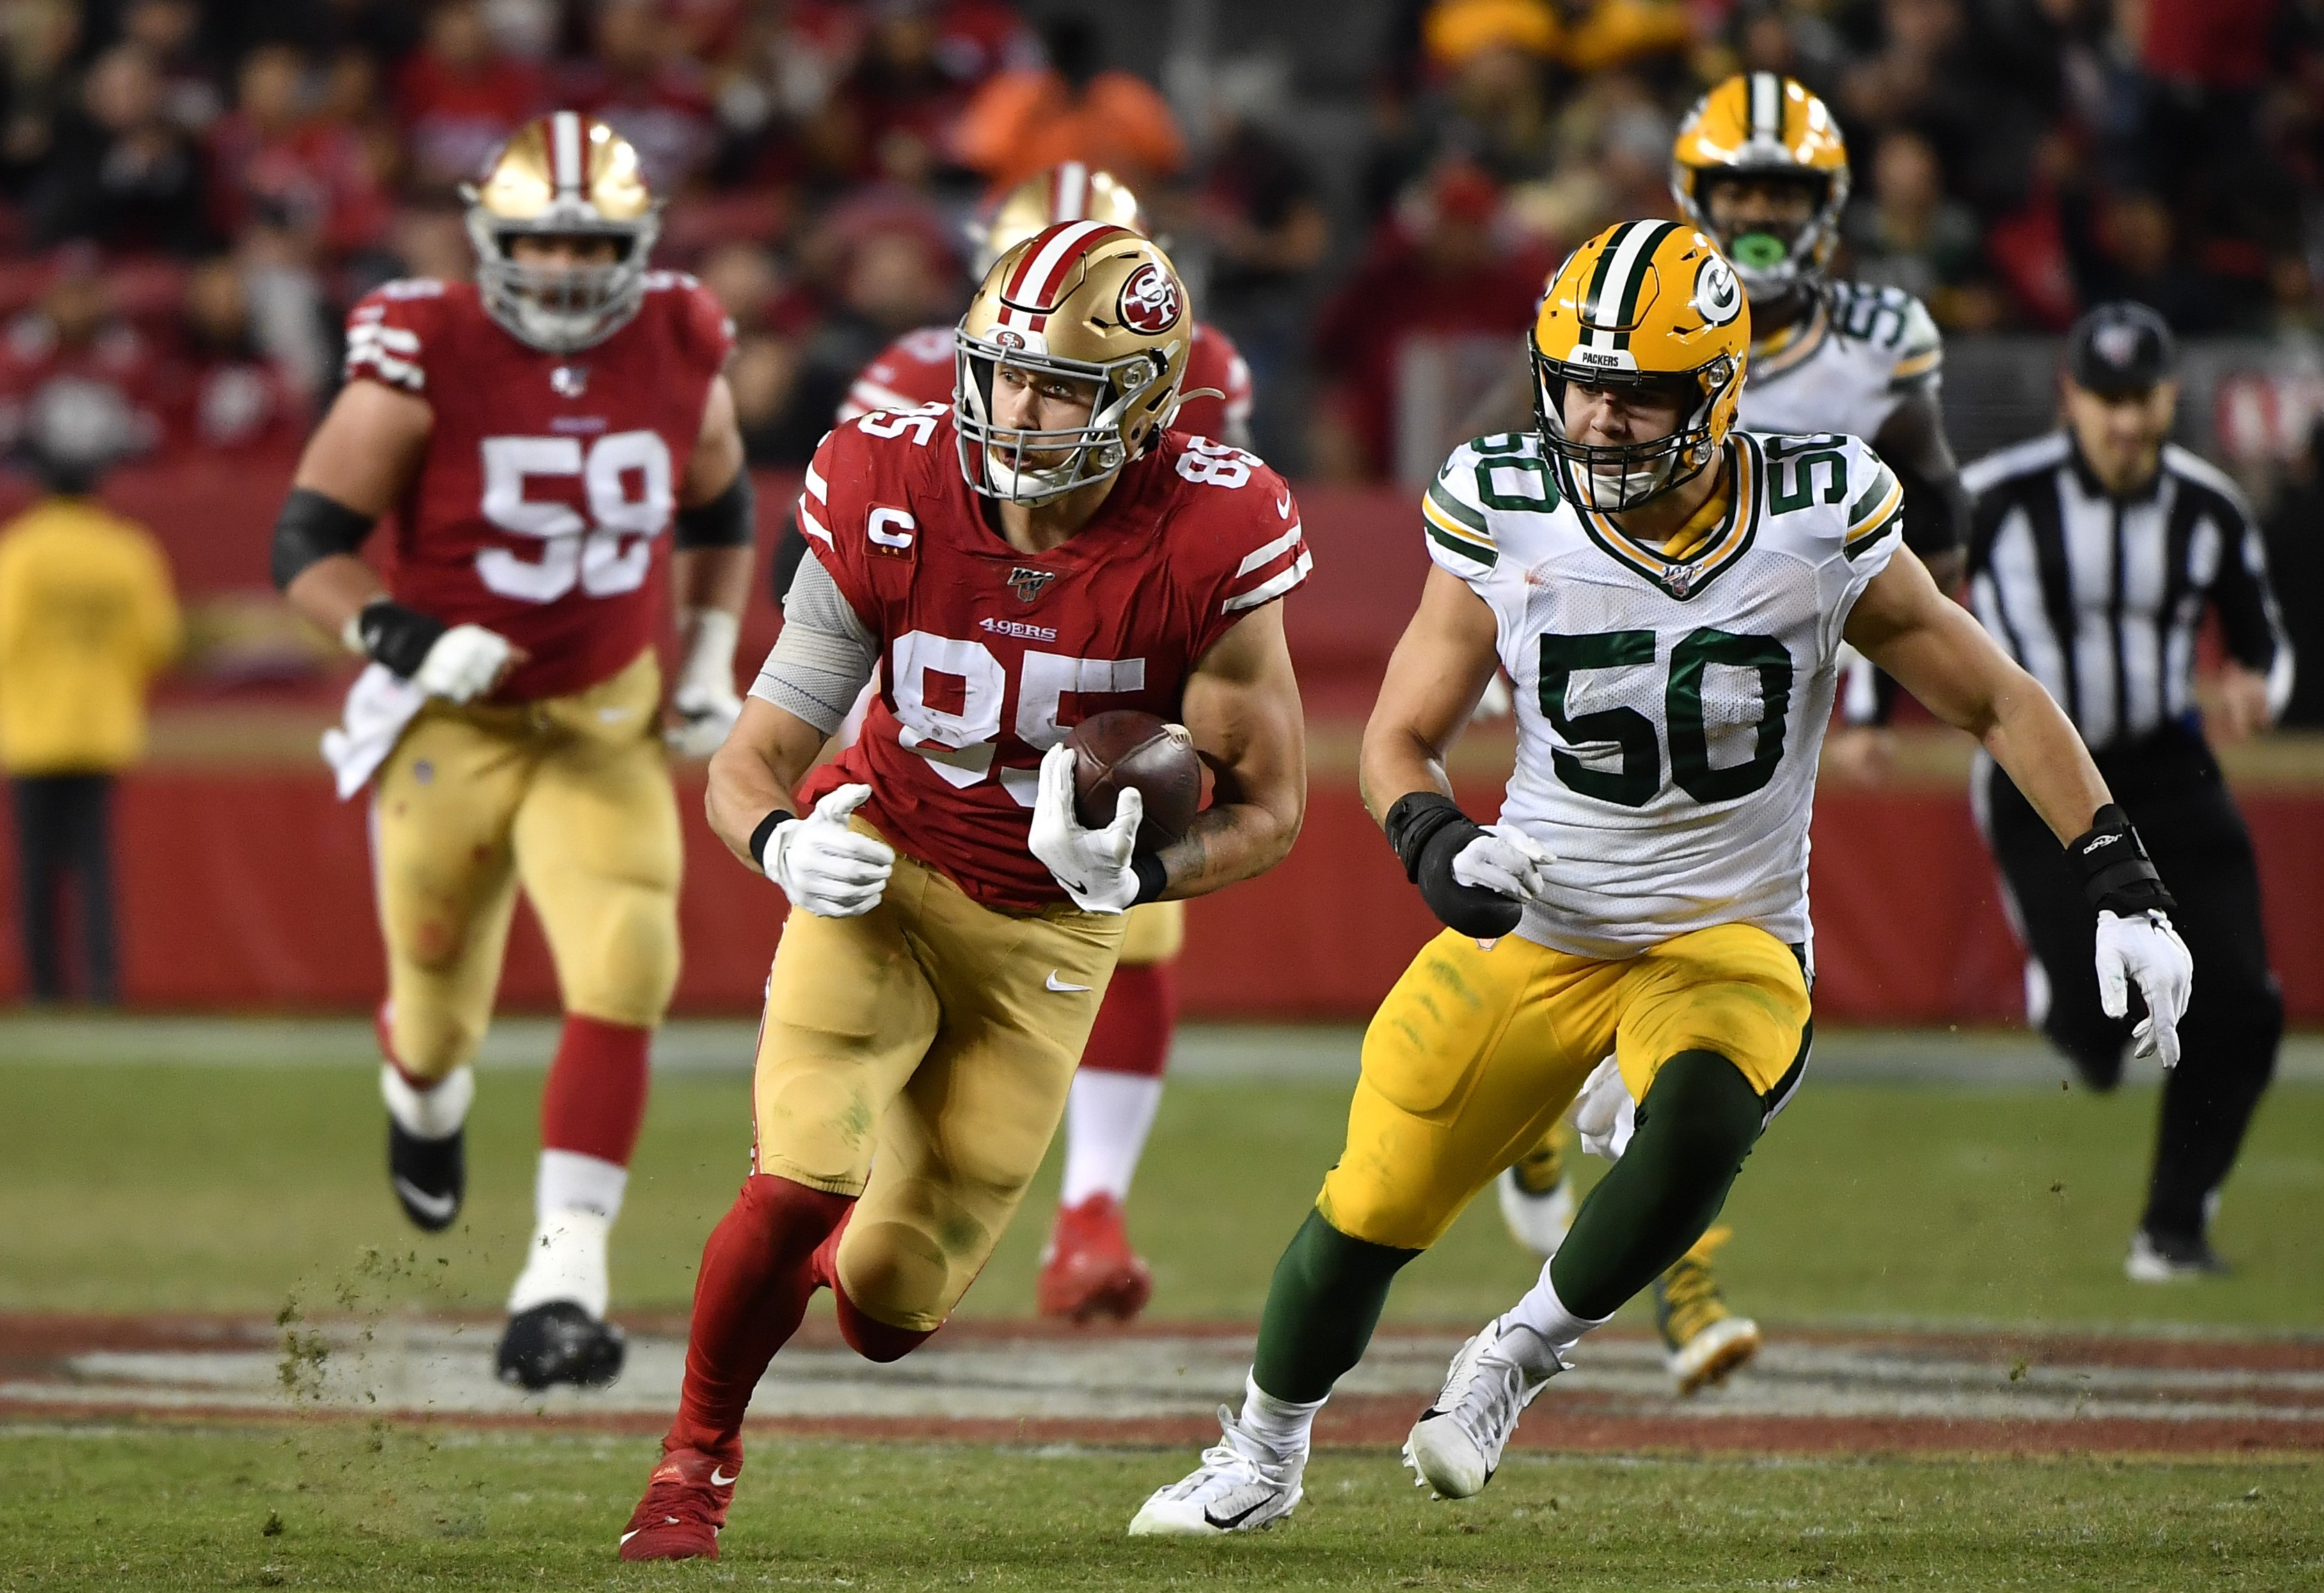 George Kittle #85 of the San Francisco 49ers runs with the ball in the game against the Green Bay Packers at Levi's Stadium, November 24, 2019. /CFP